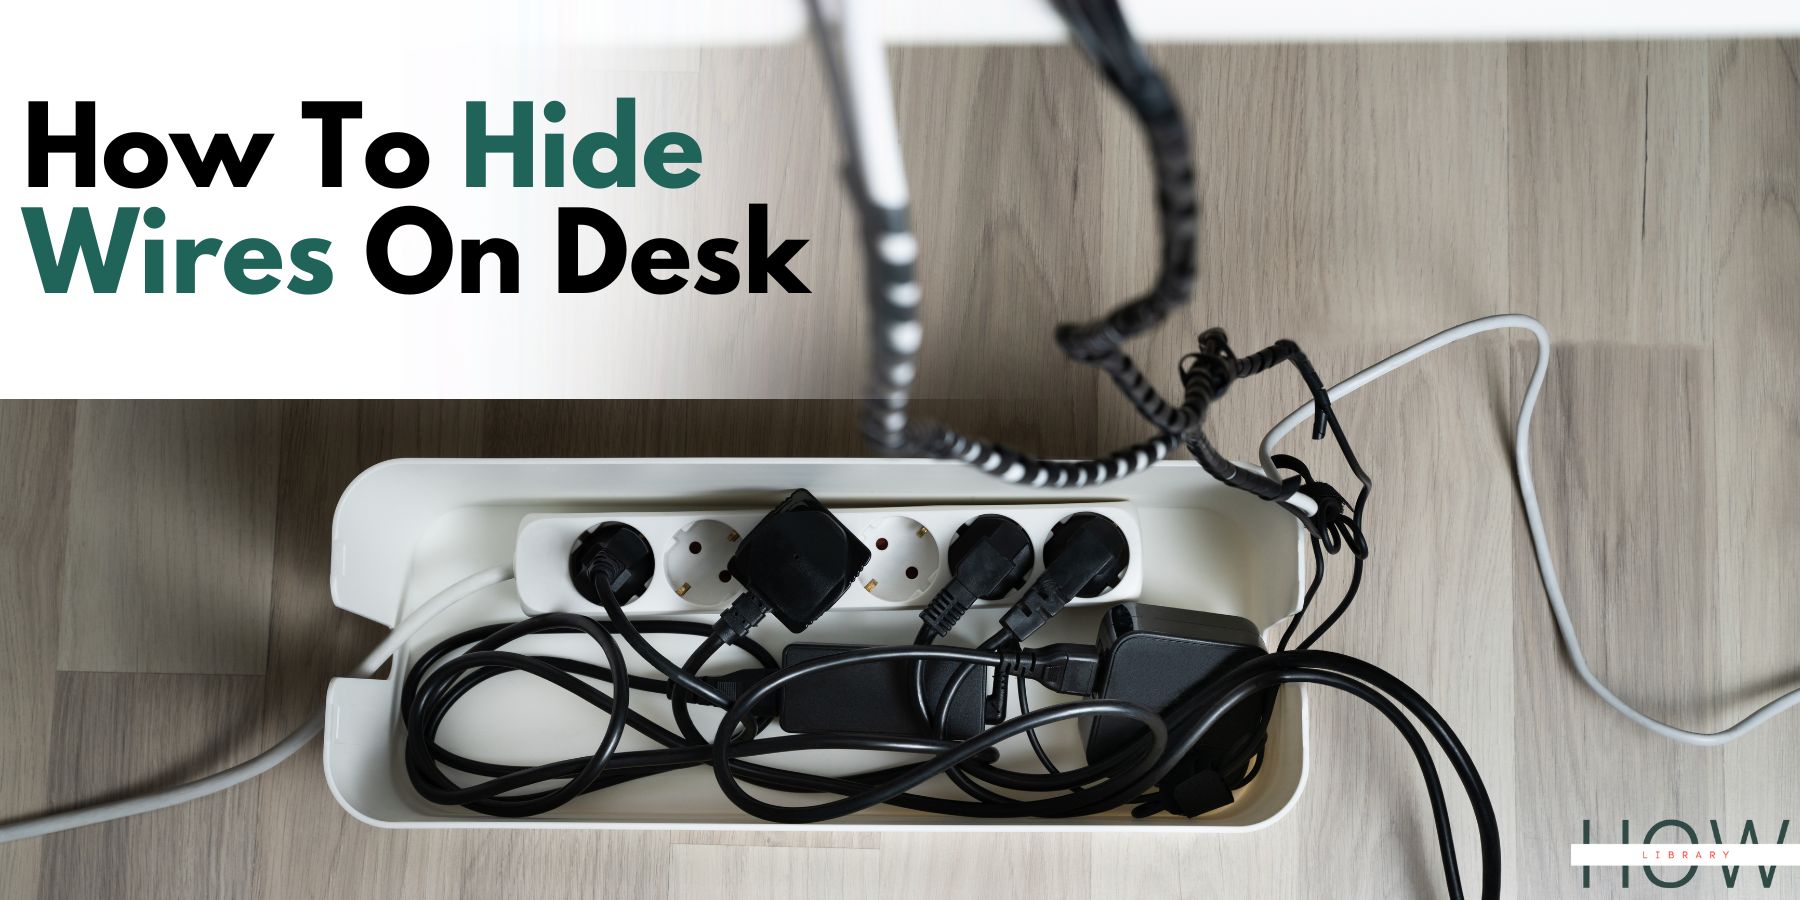 How To Hide Wires On Desk